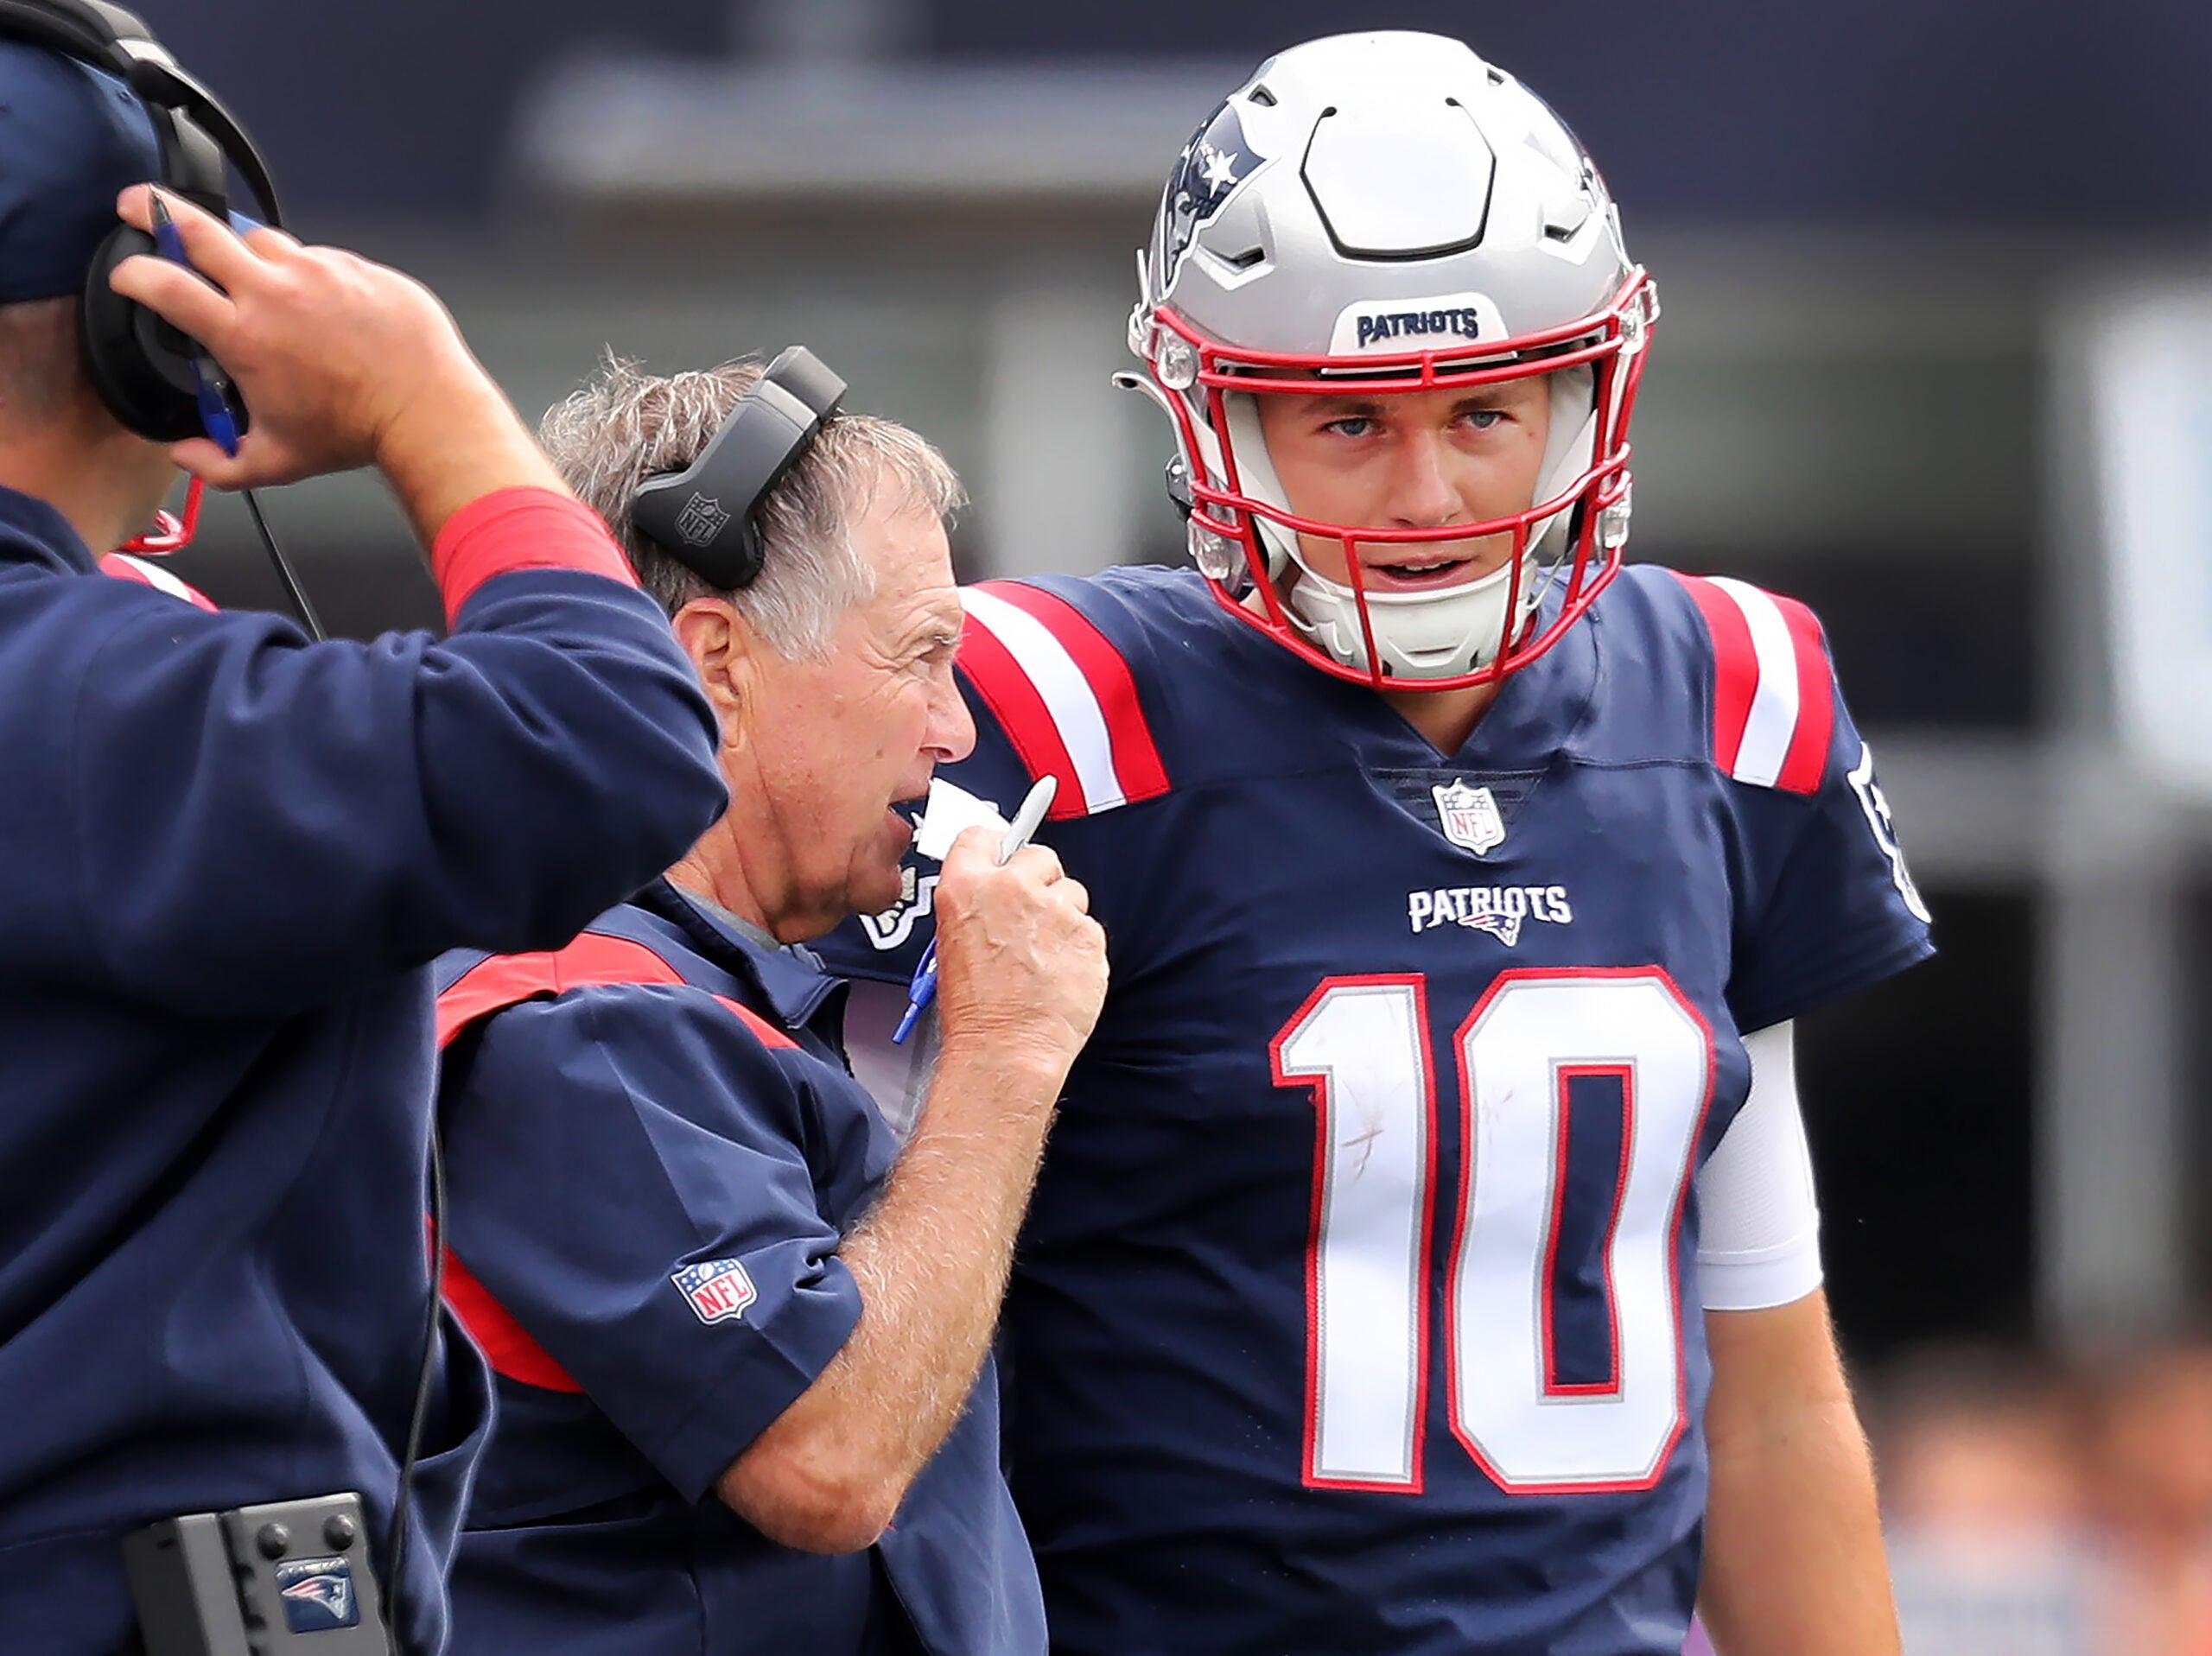 Patriots quarterback Mac Jones (right) listens to head coach Bill Belichick (left) on the sidelines. Joe Judge is at far left. The New England Patriots hosted the Baltimore Ravens in a regular season NFL football game at Gillette Stadium.